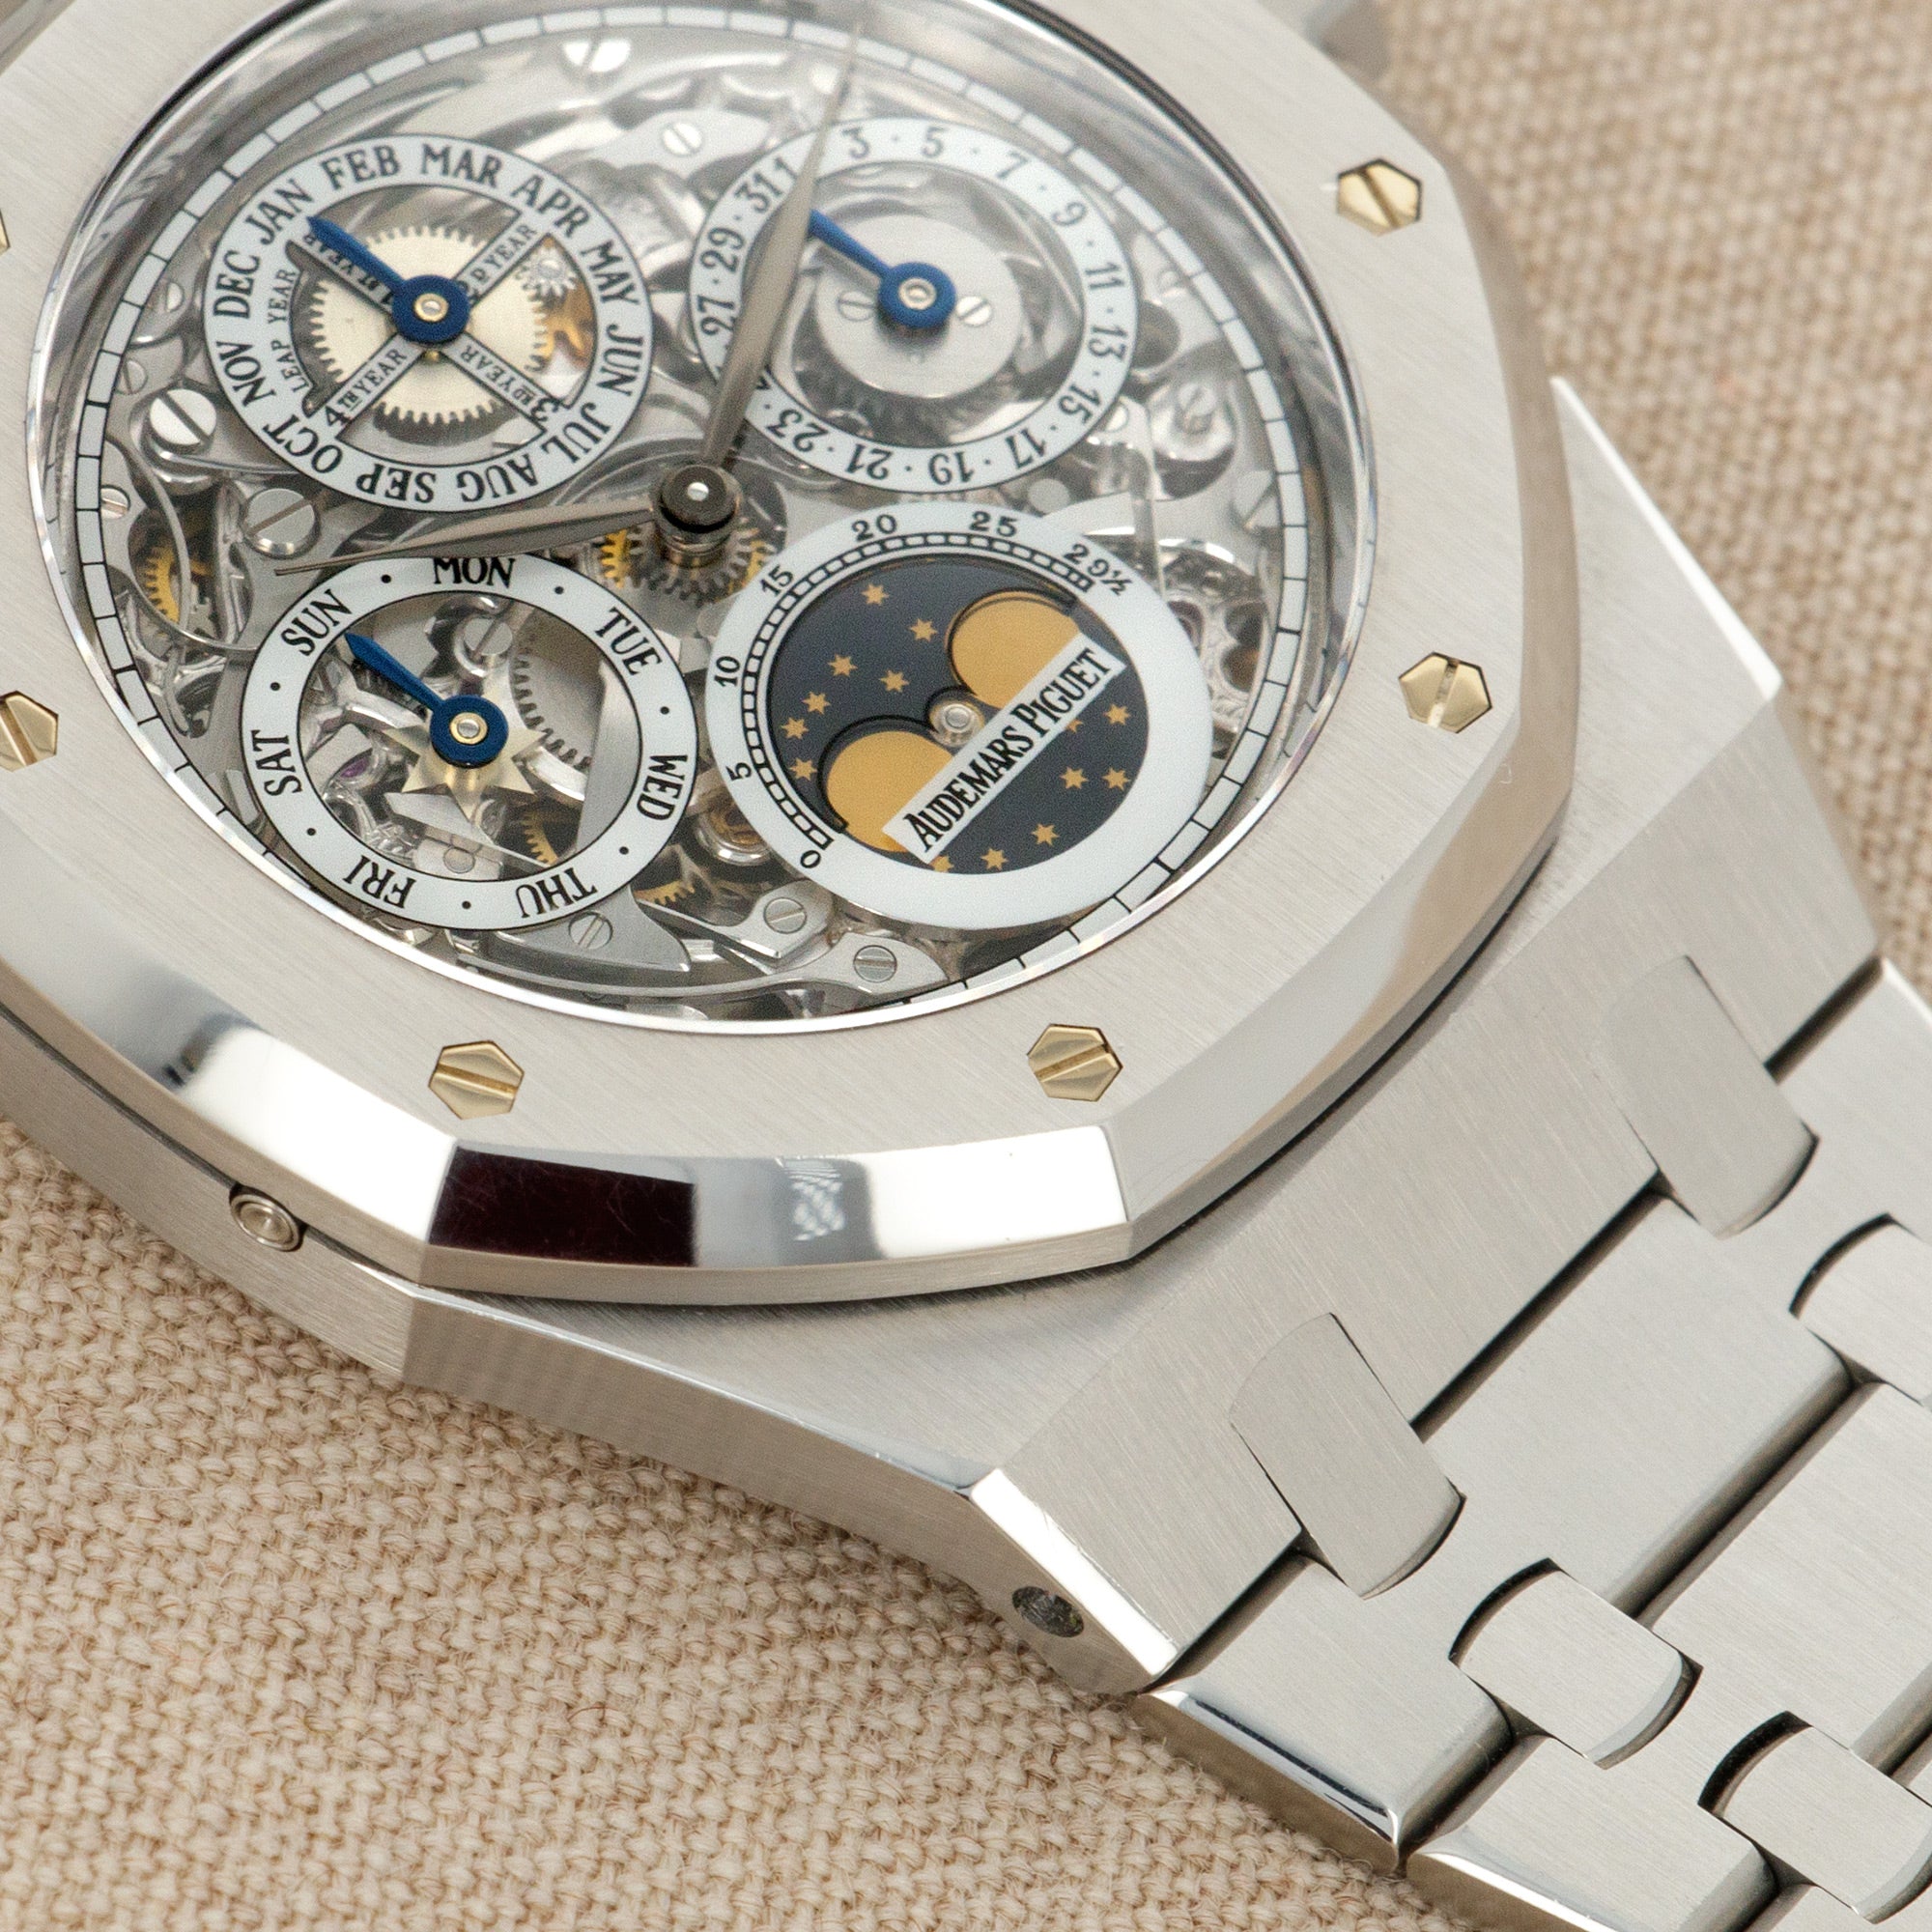 Audemars Piguet Royal Oak Skeleton Openworked, AP service and for  $135,545 for sale from a Trusted Seller on Chrono24